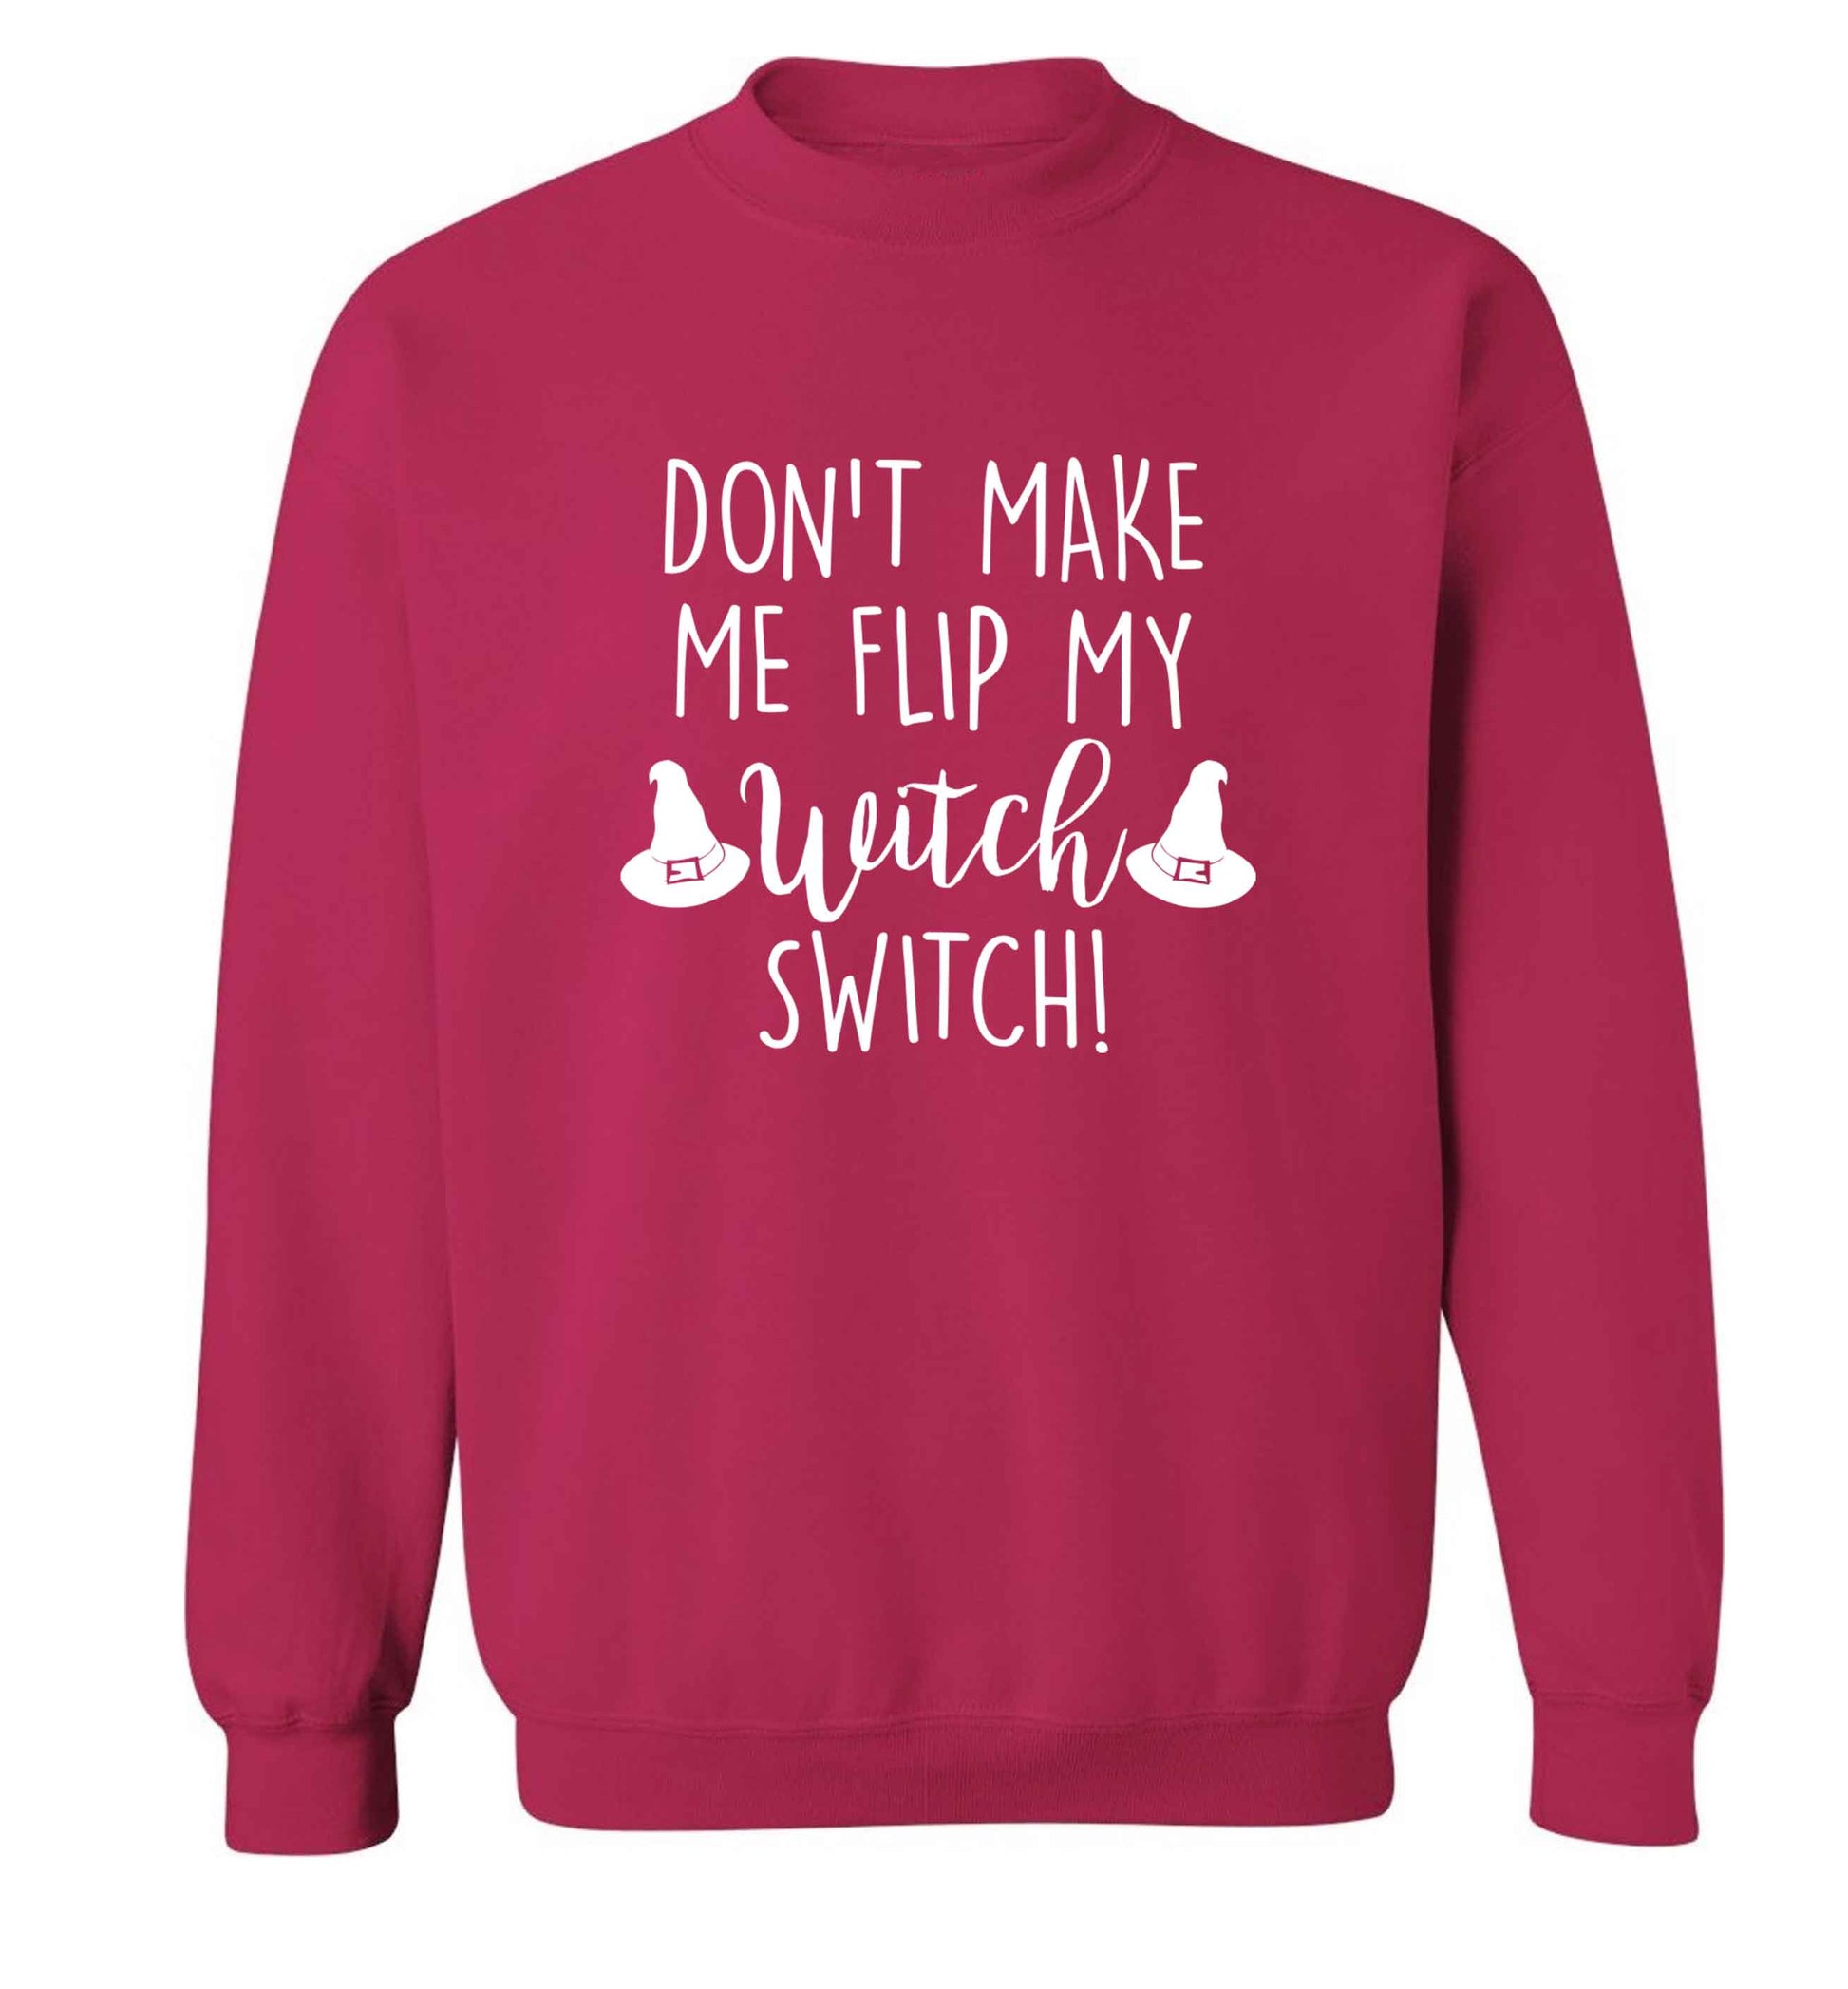 Don't make me flip my witch switch adult's unisex pink sweater 2XL